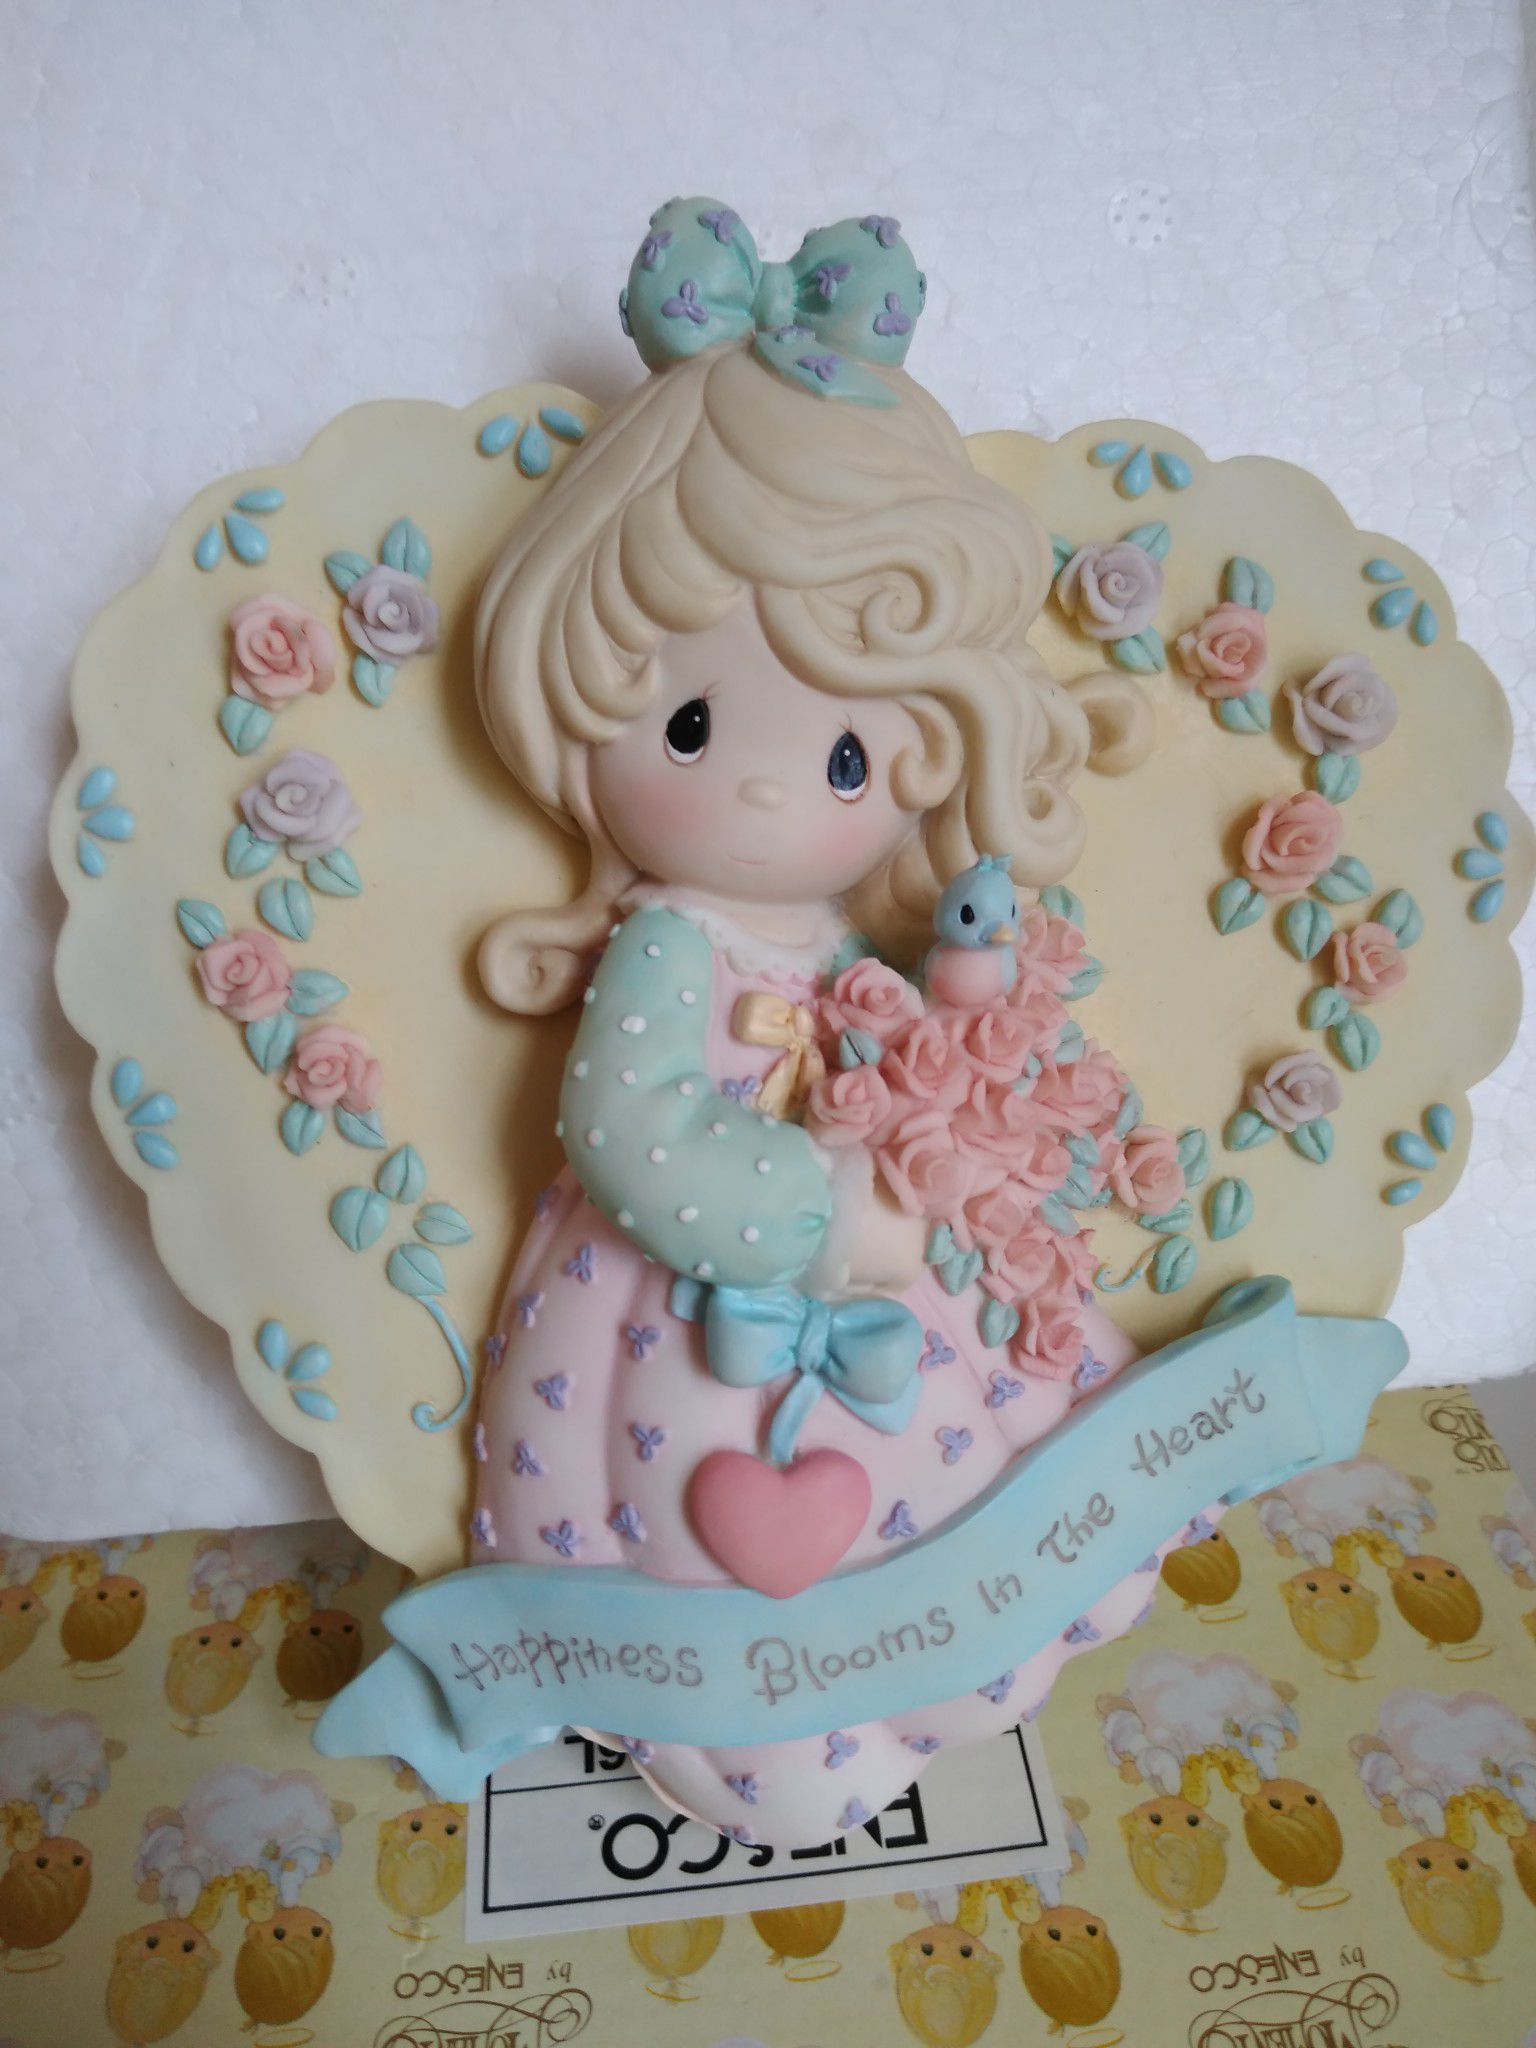 Precious Moments 3 D Plaque Happiness Blooms In The Heart 1f